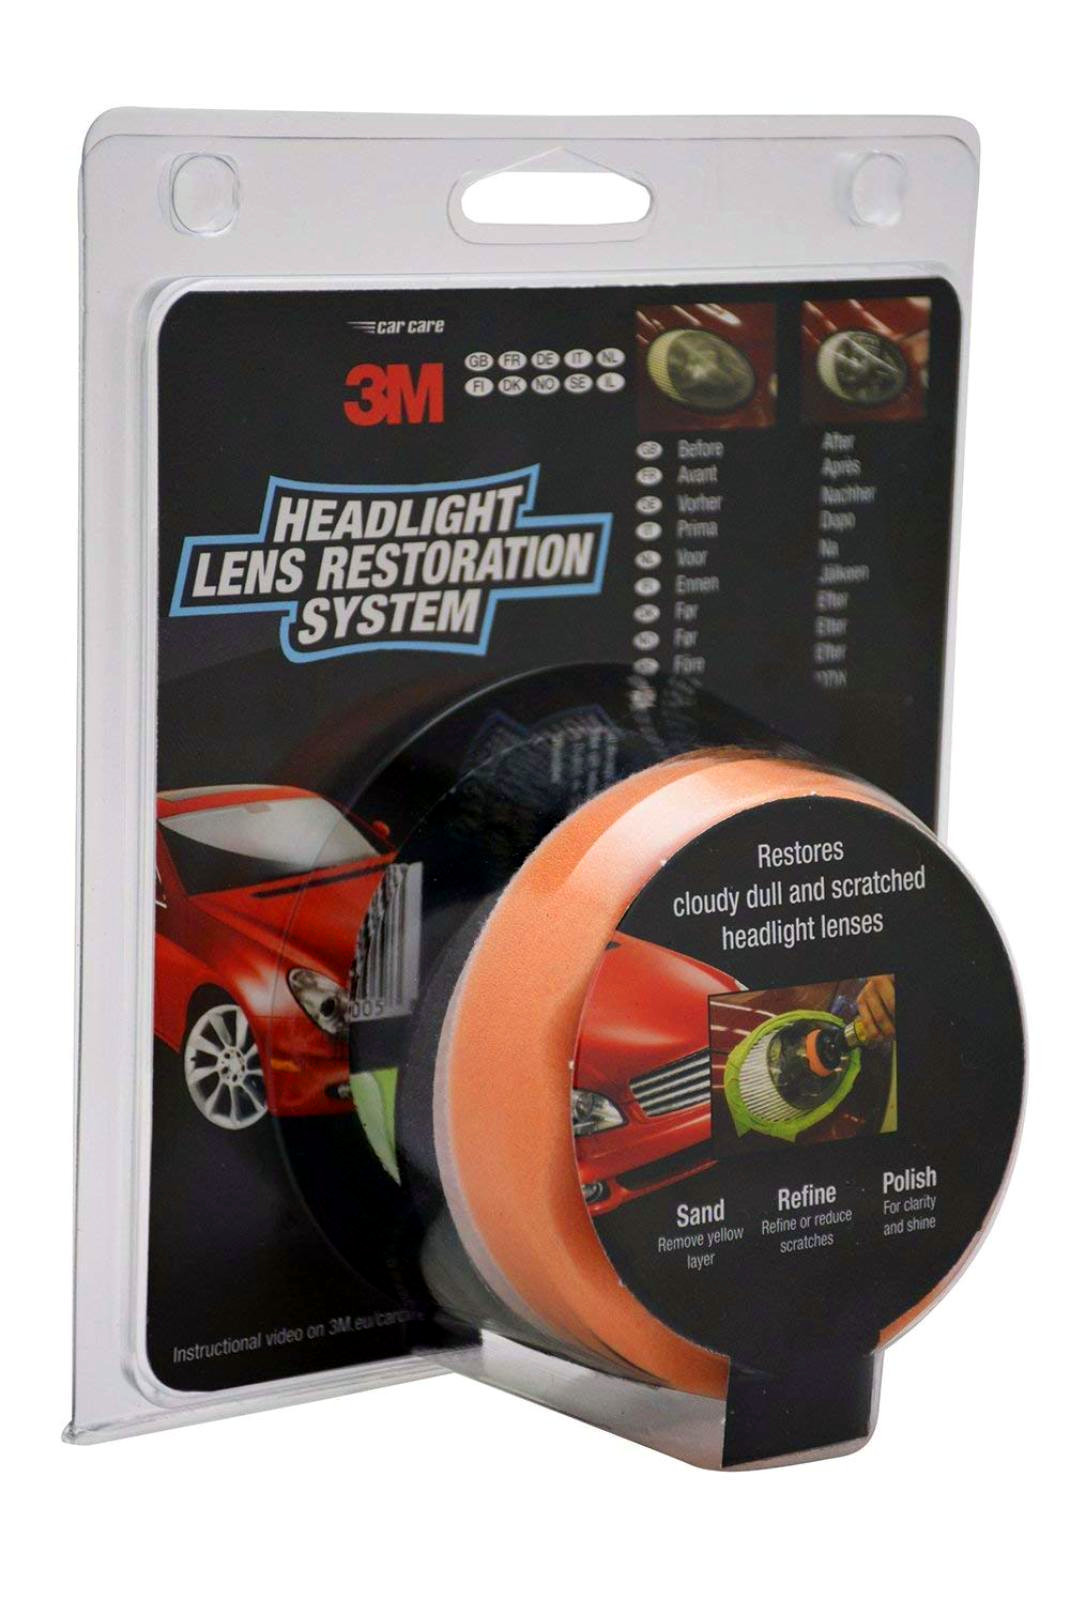 3M Headlight Restoration Kit - Polish your headlamps or lens with a drill -  UK